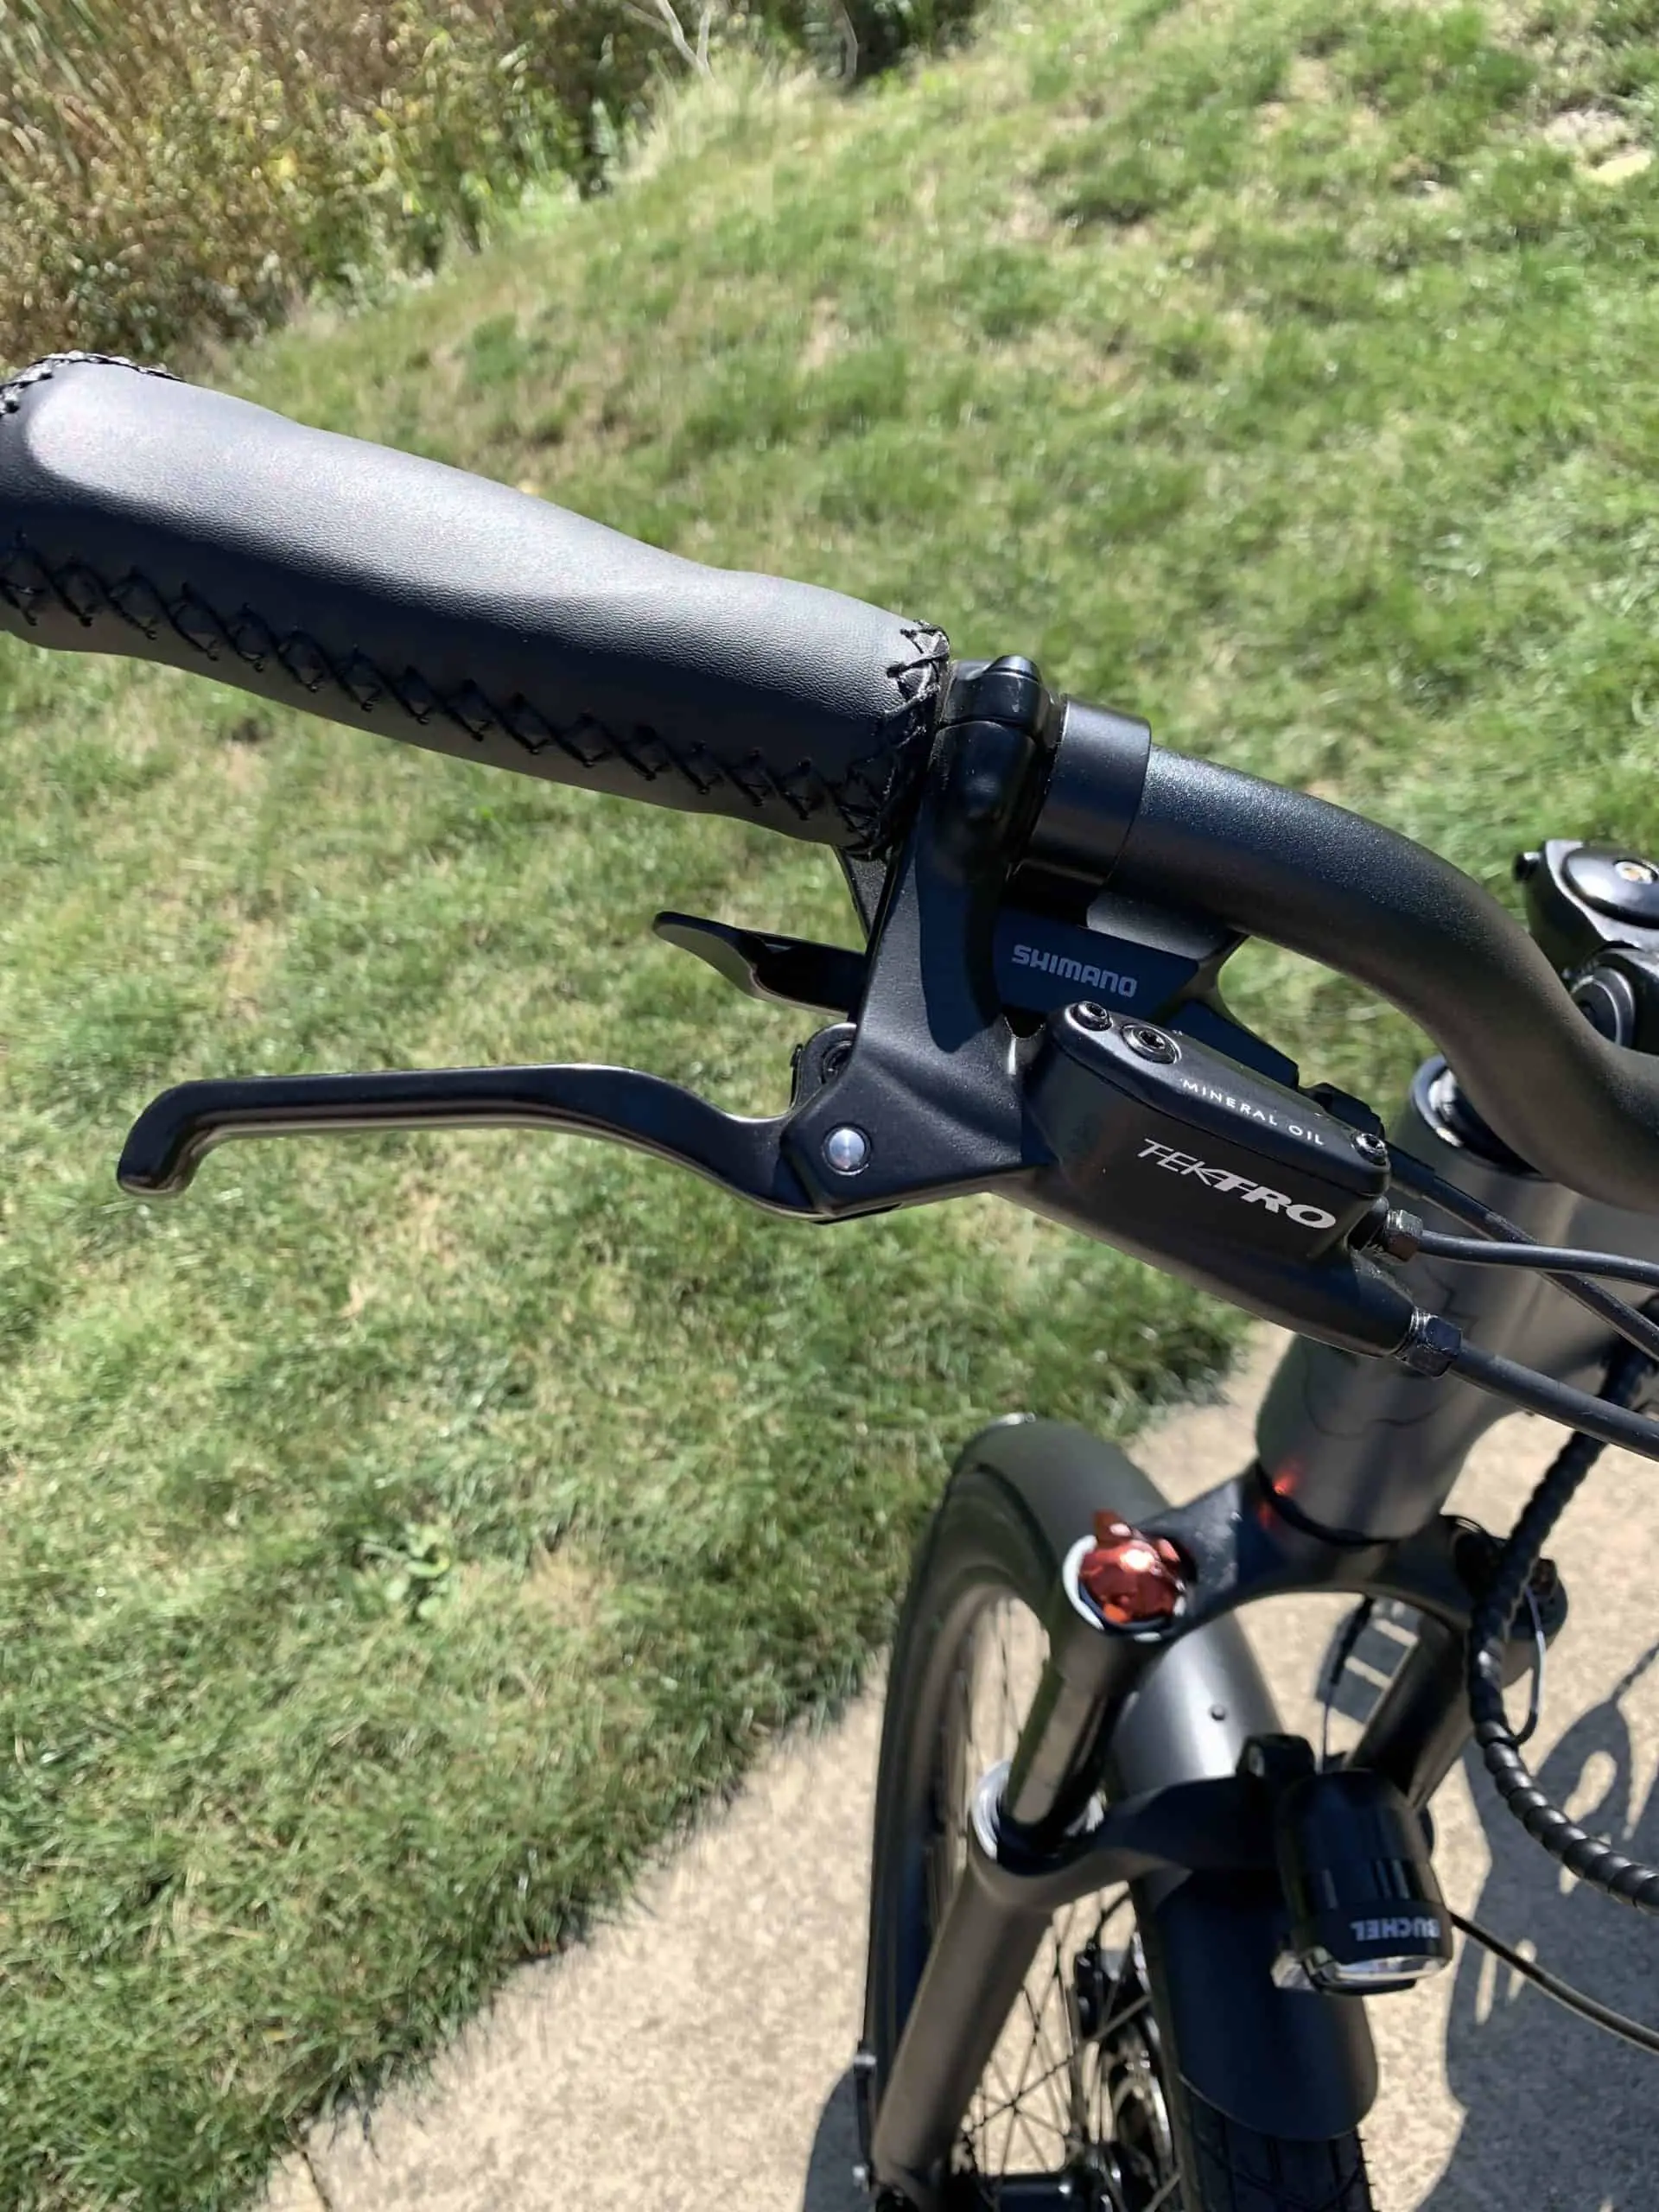 Ride1Up 700 SERIES Ebike Review – Does it Check All The Boxes on Our List? 2